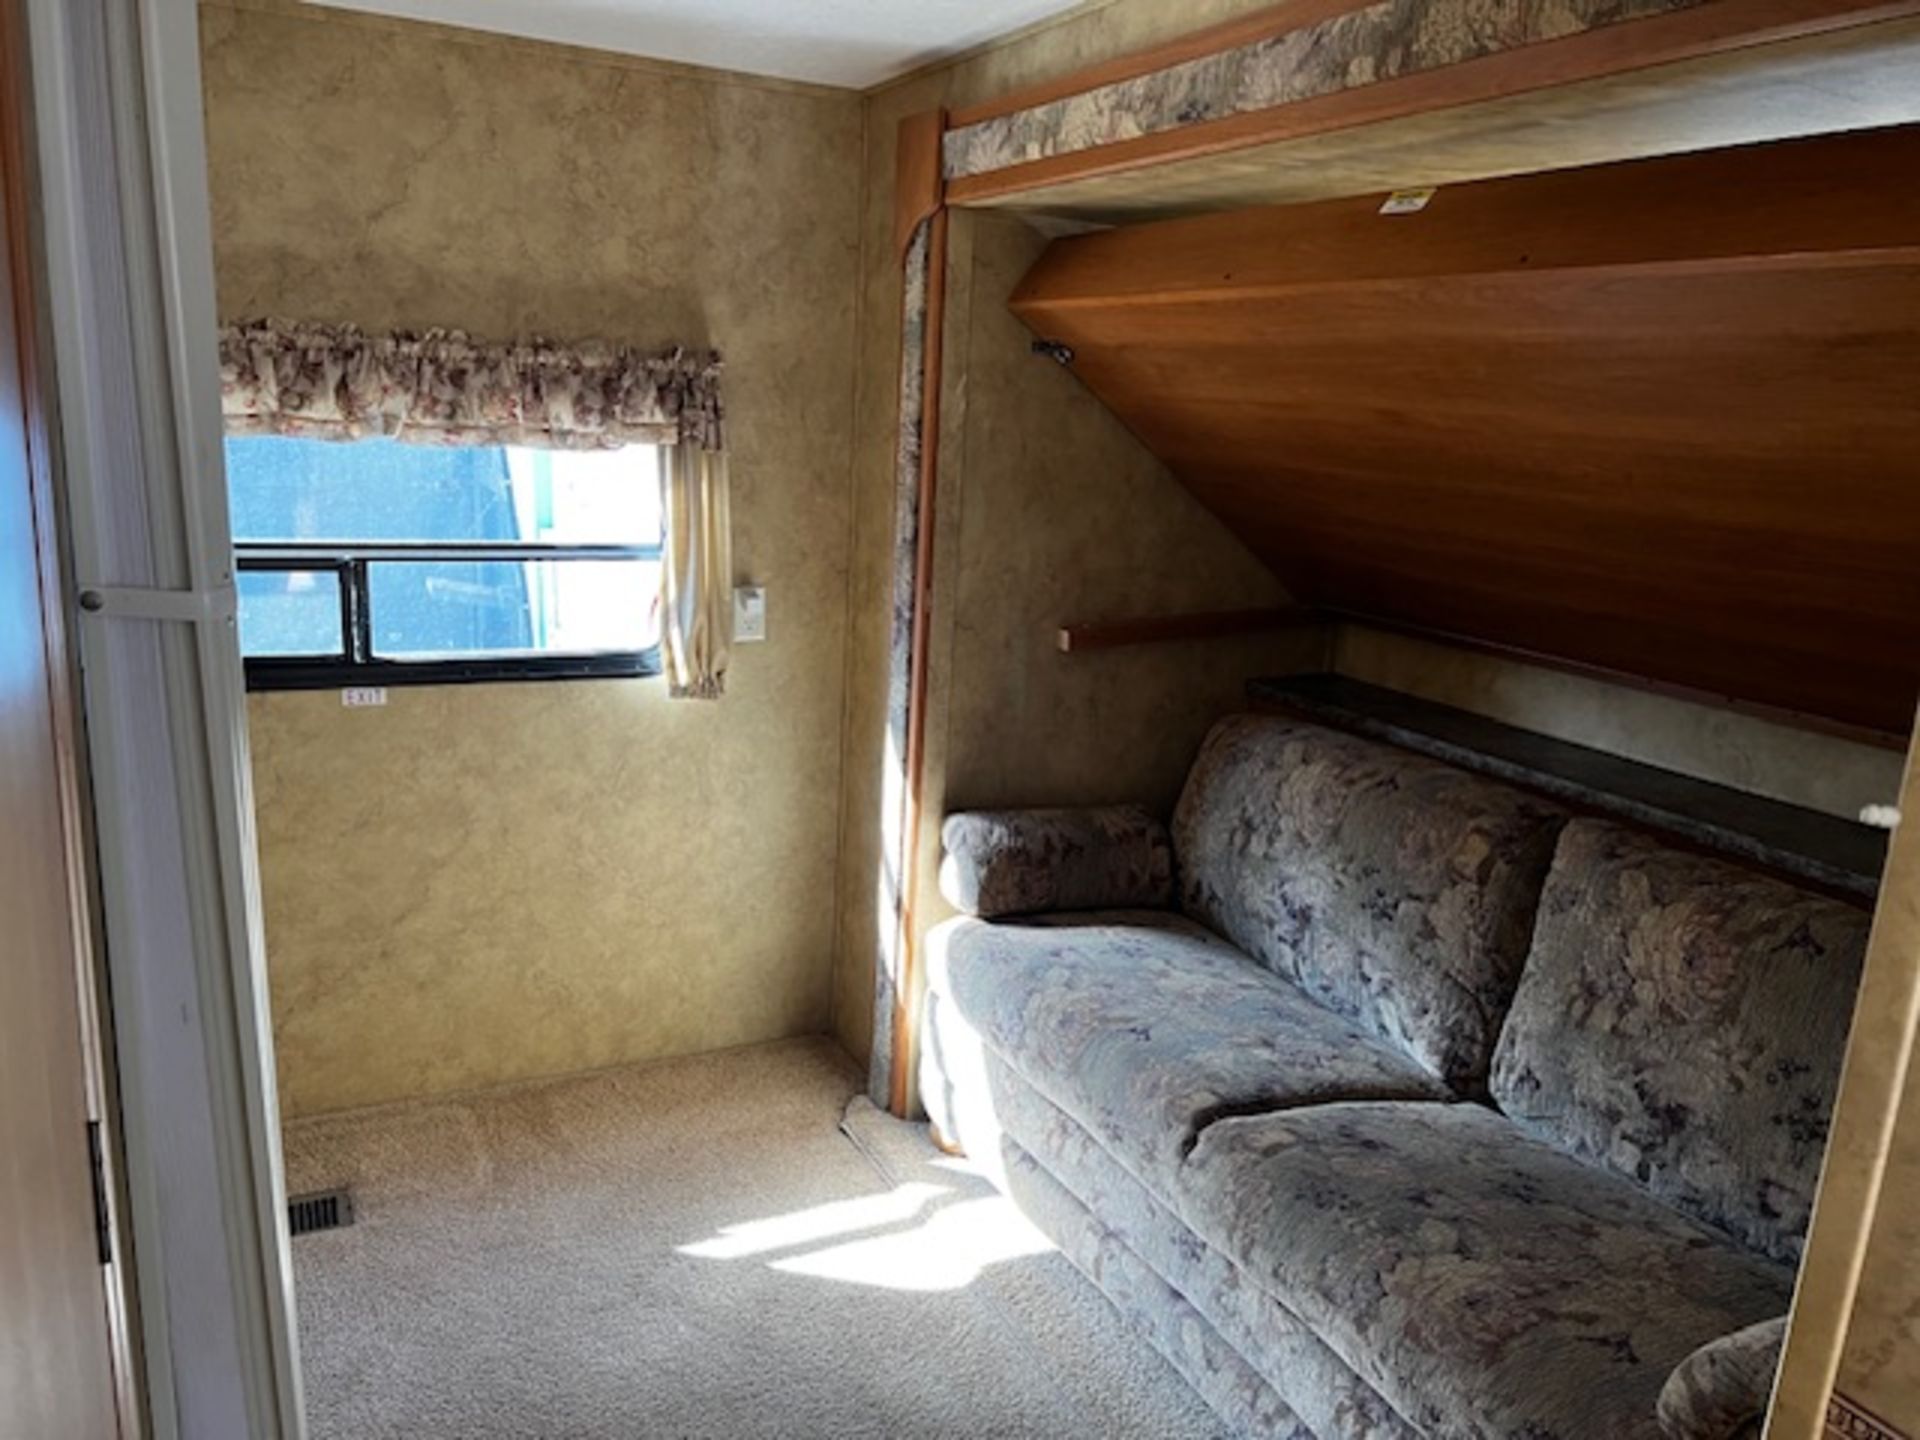 2008 COUGAR 304 VHS 30' TRAVEL TRAILER W/2 S/O, WINTERIZED, S/N: 4YDT304288C507042 - Image 16 of 20